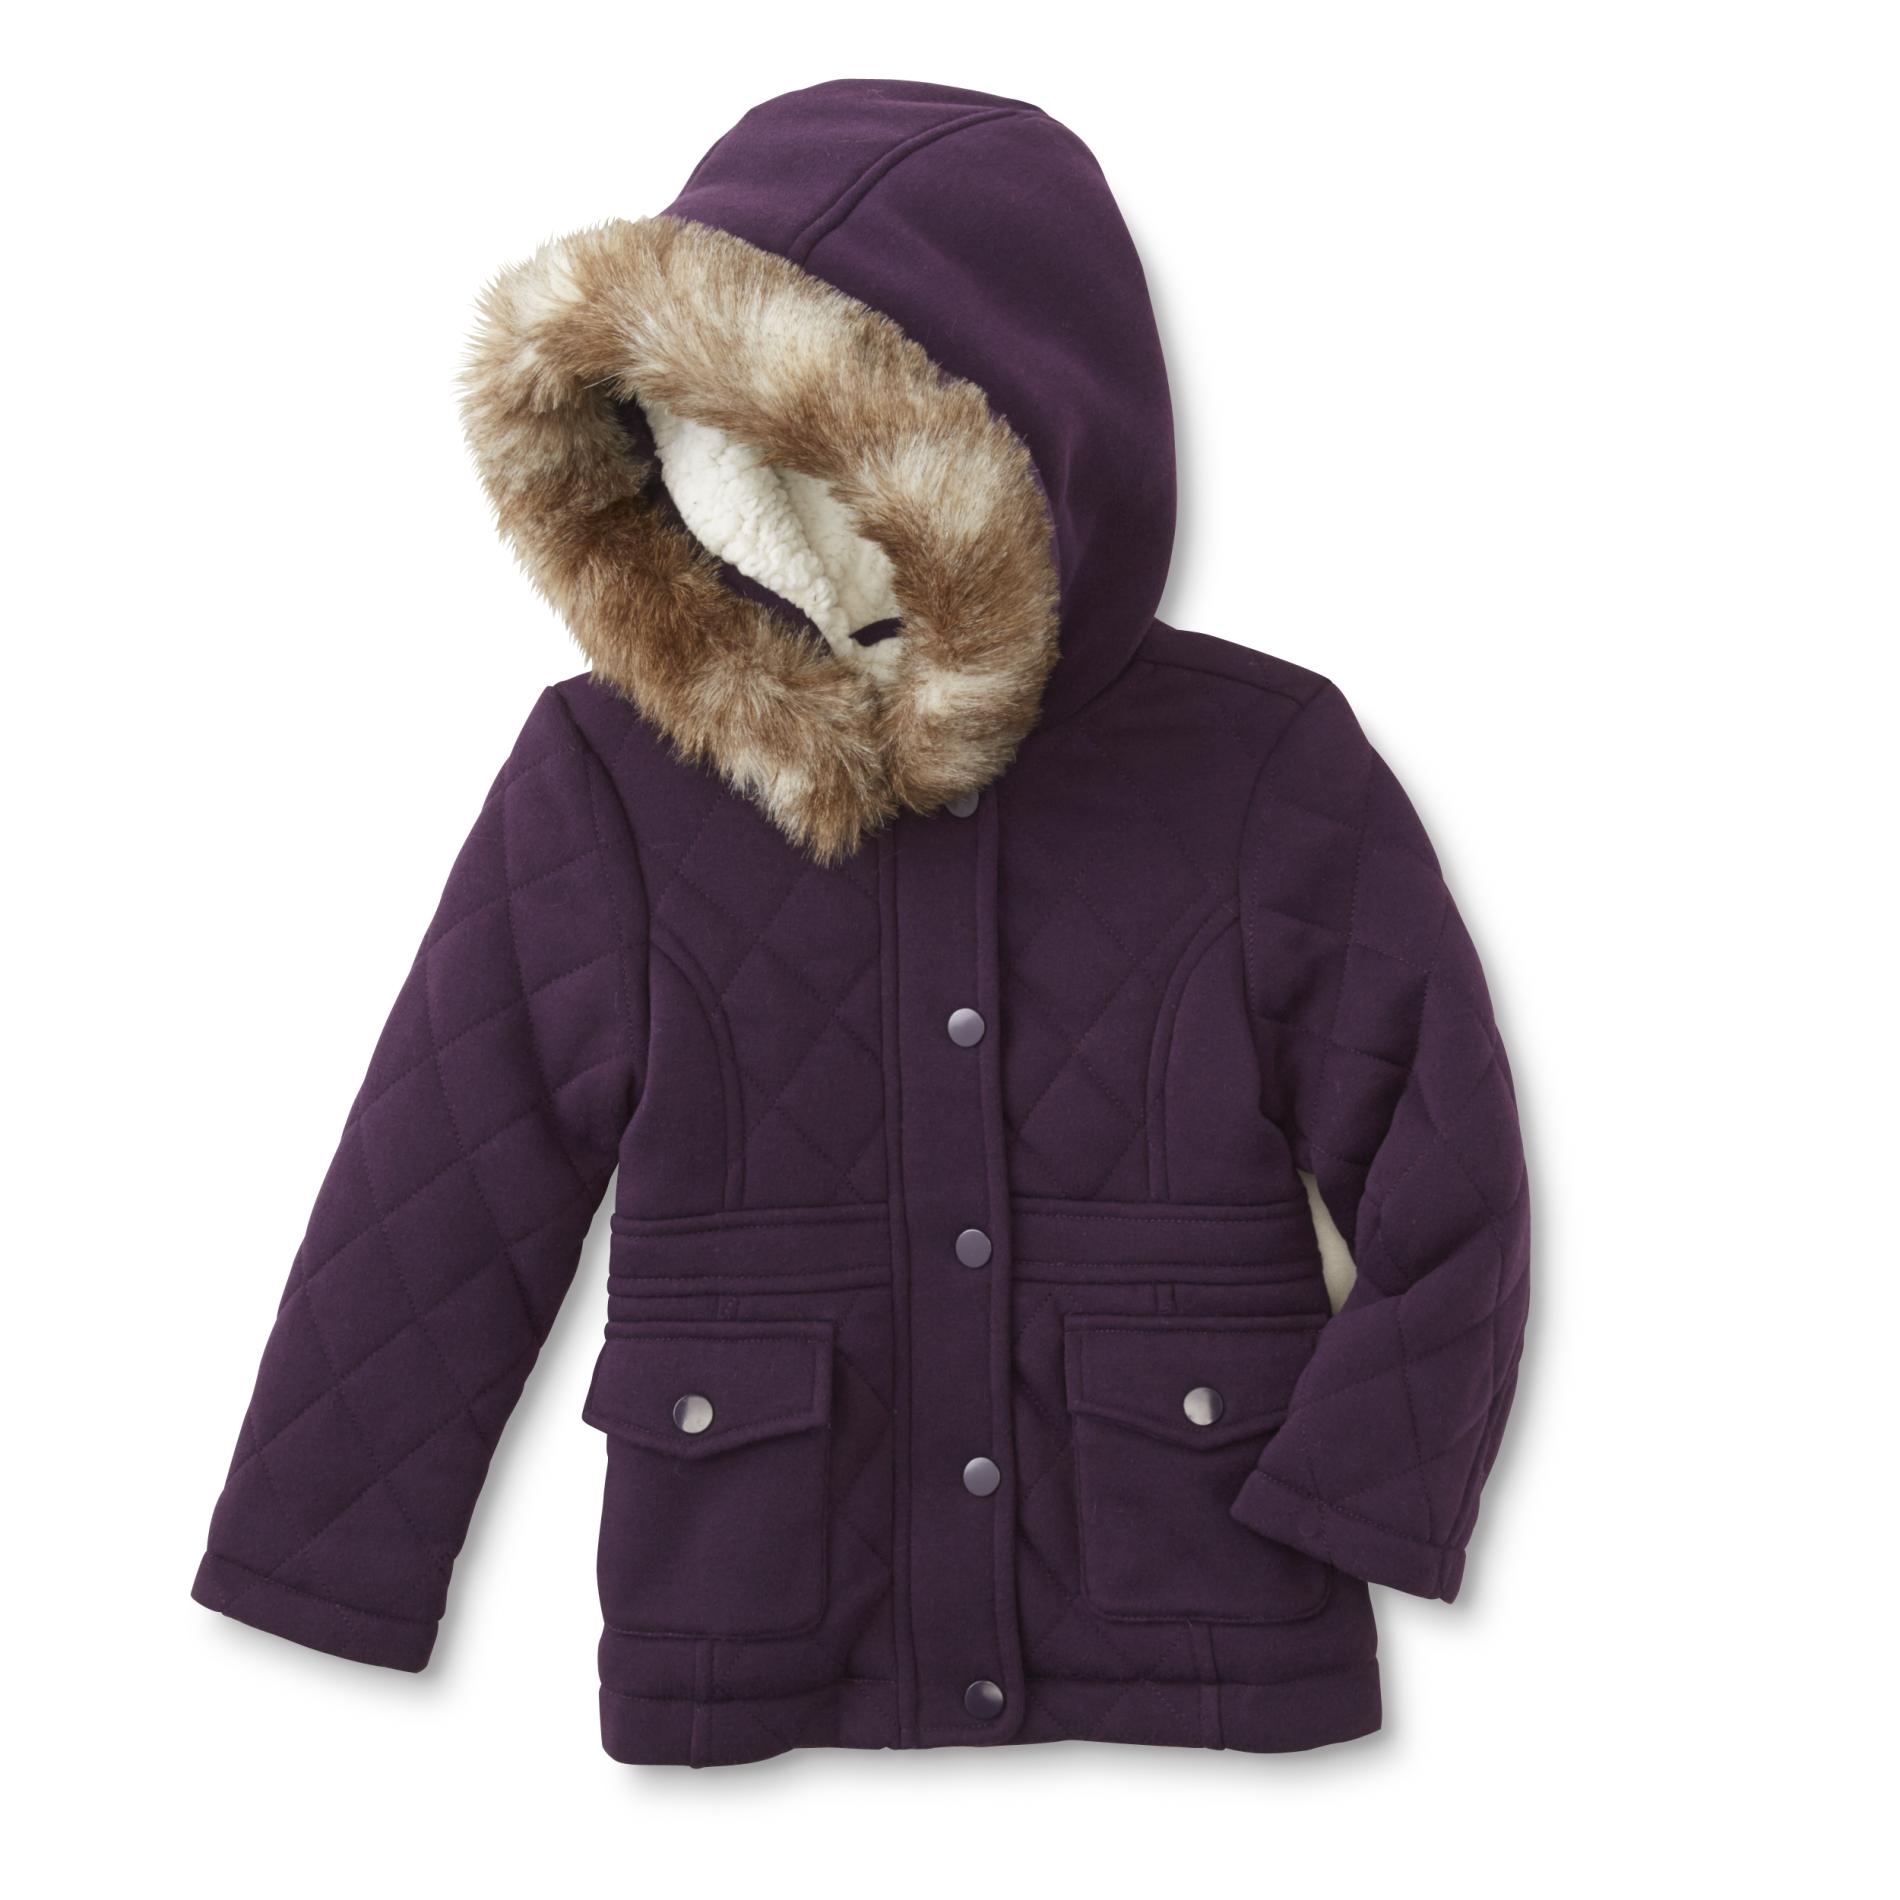 Toughskins Toddler Girl's Quilted Jacket